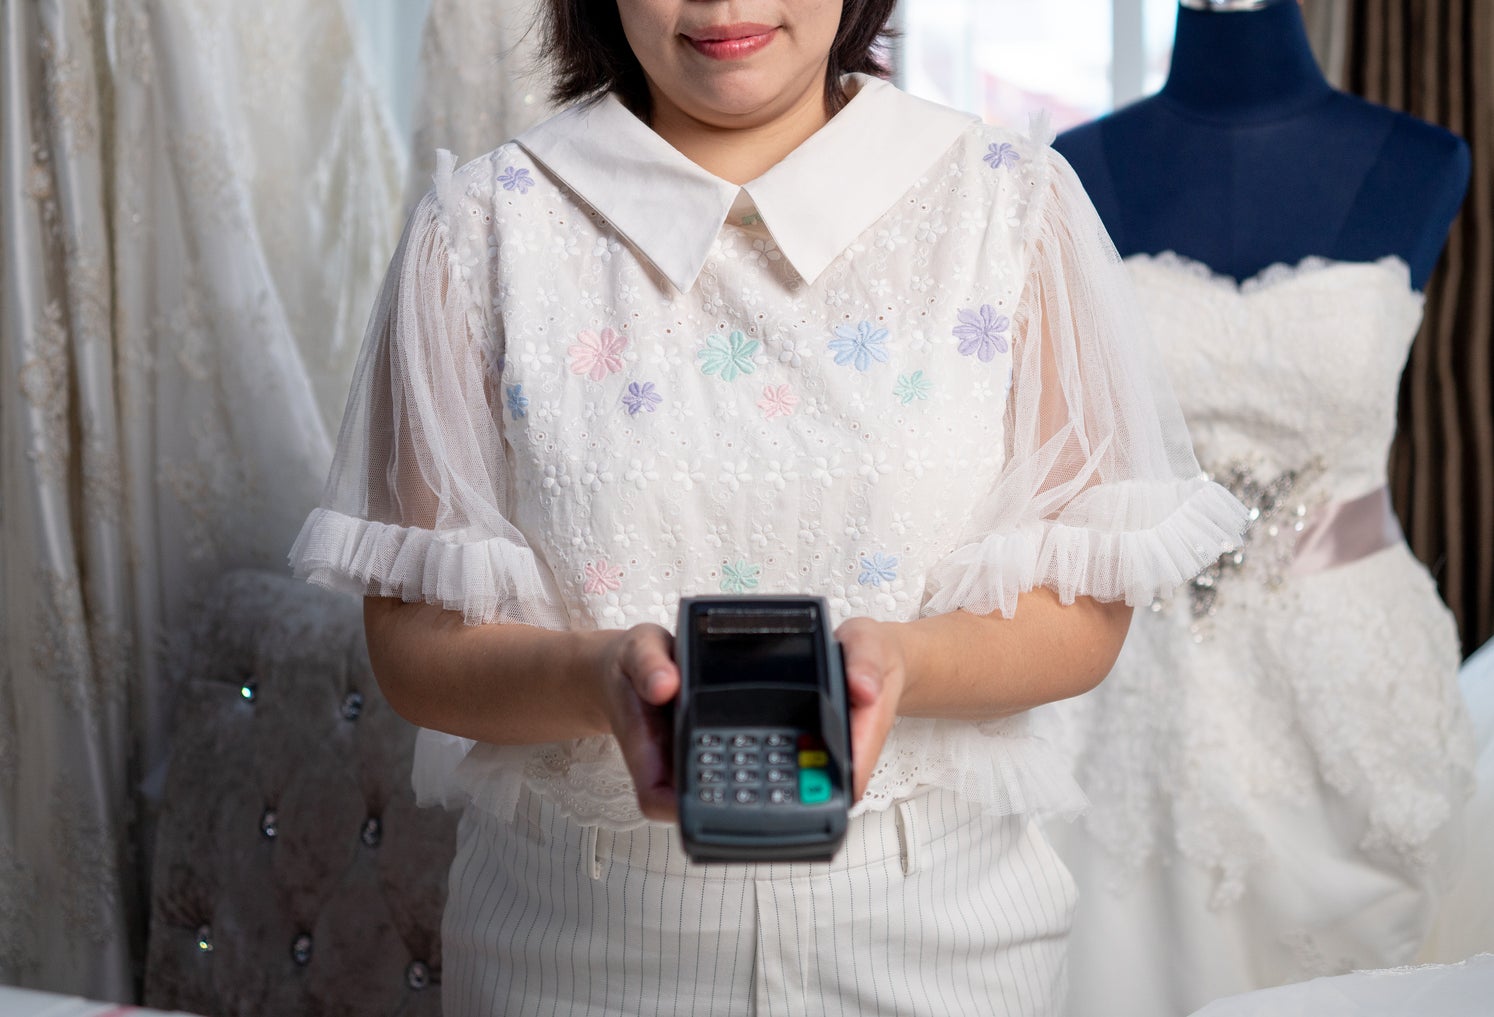 Dress shop accepting payment by credit card machine, woman holds a credit card machine